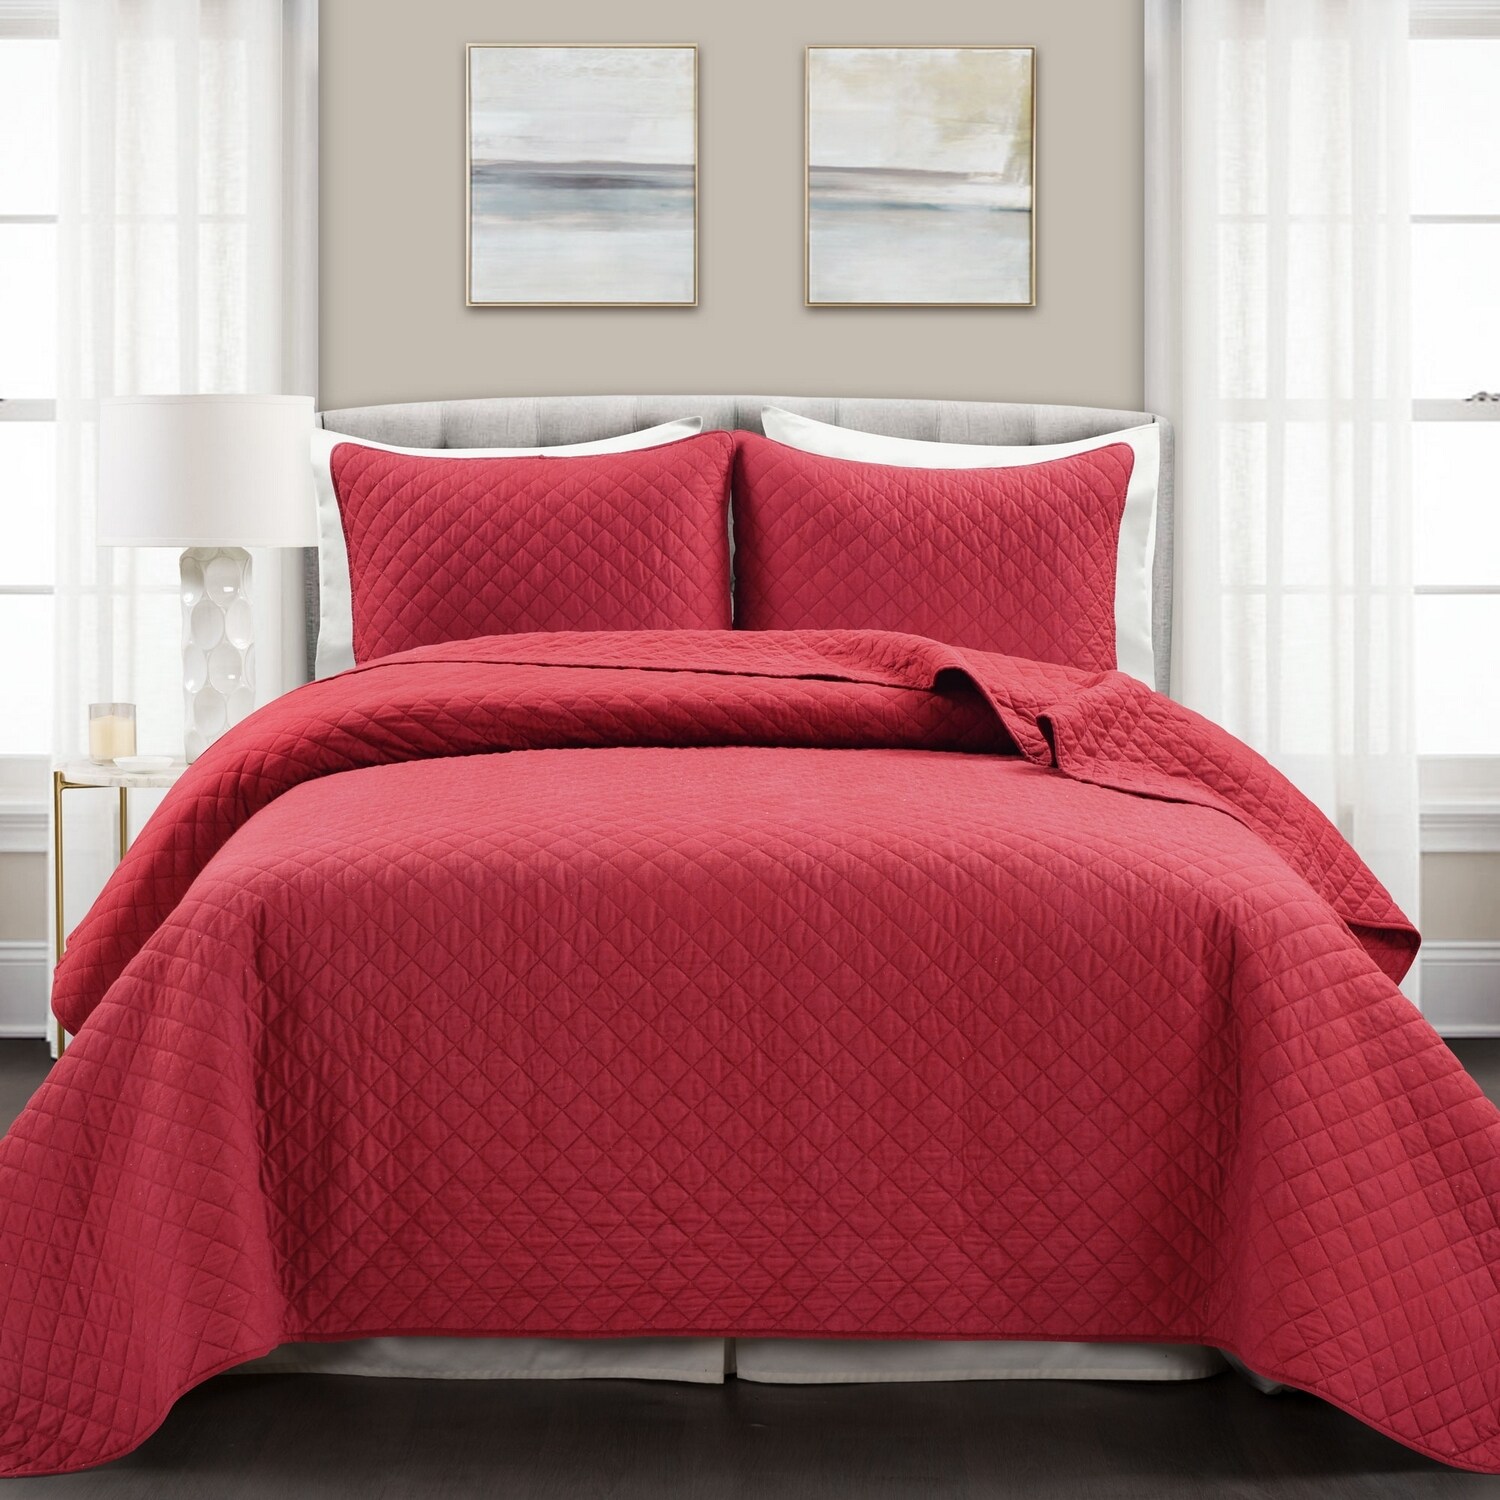 Lush Decor Red Stripe Reversible King Quilt Cotton with (Fill) in